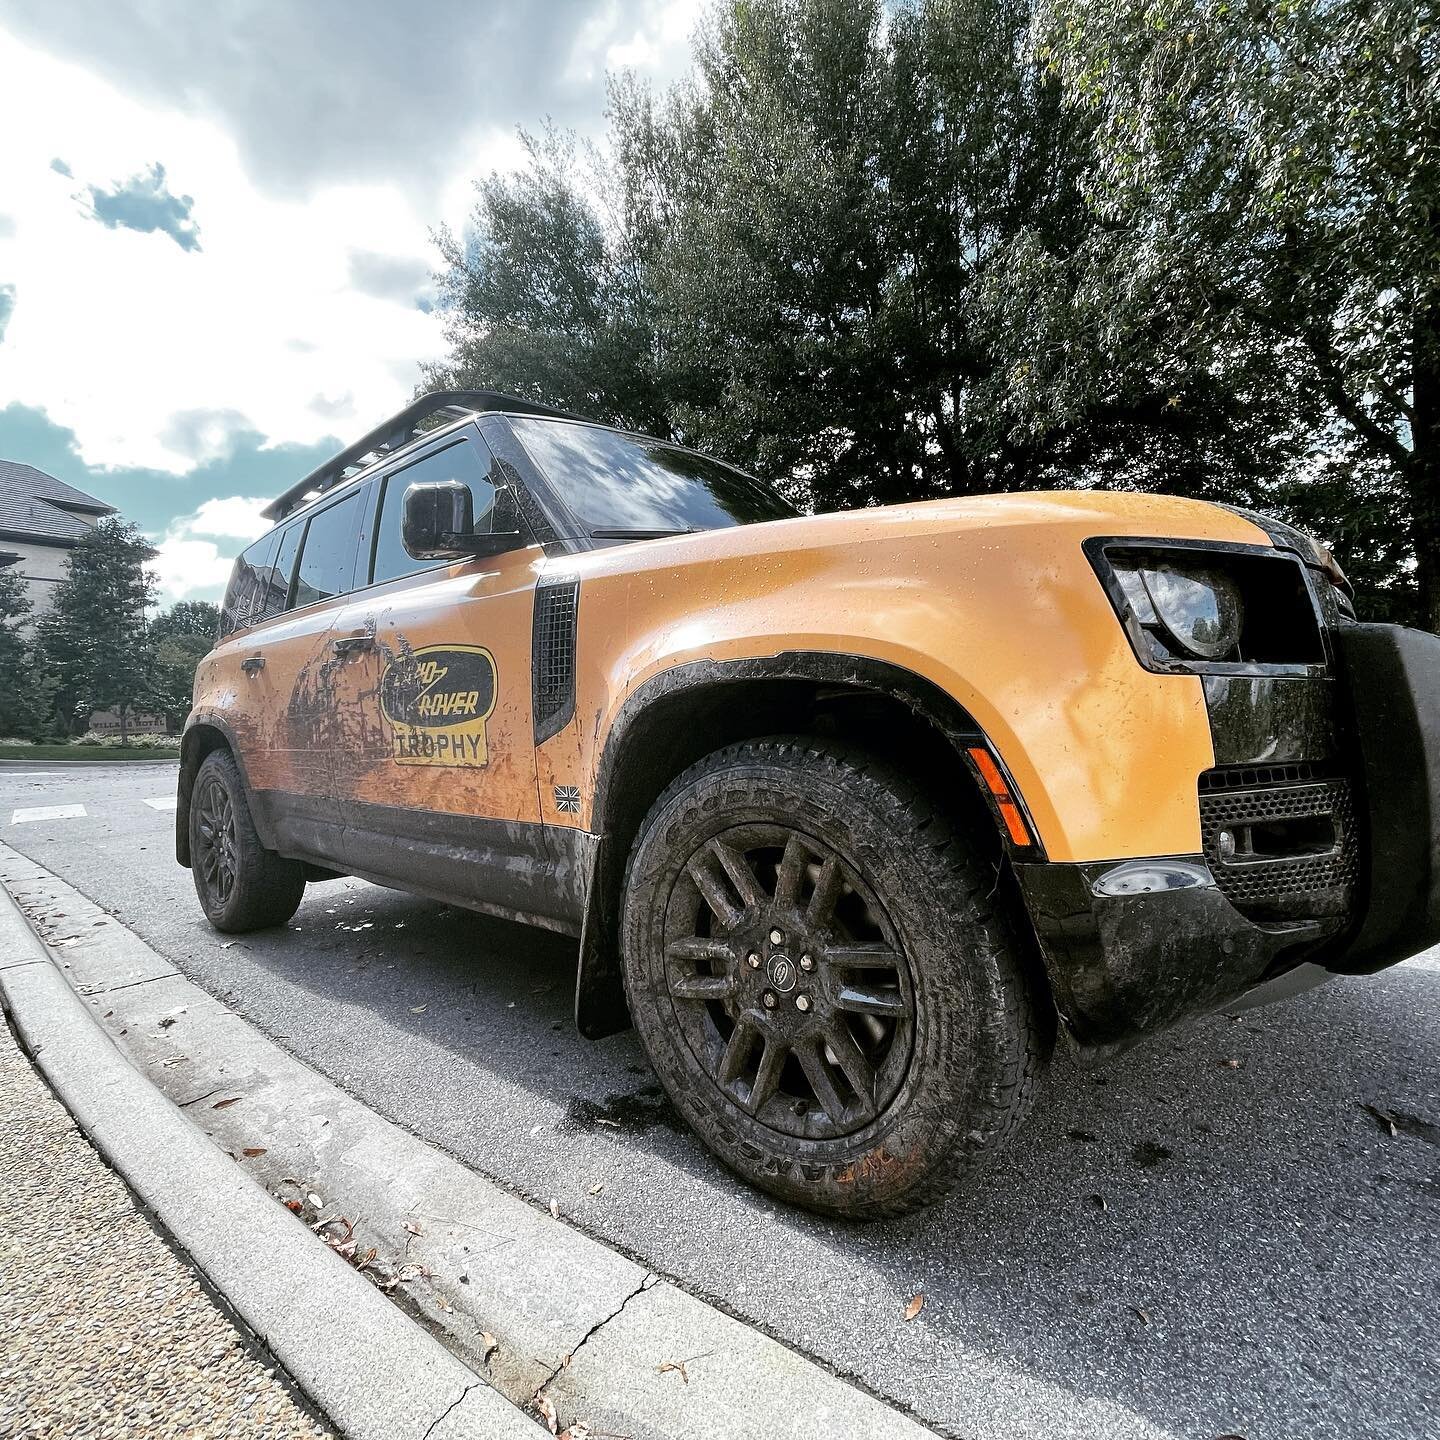 The US Defender Trophy has its first day of competition tomorrow. I&rsquo;m looking forward to seeing how this group of new Defender owners does with the challenges ahead. 

@landroverusa @landrover #ustrophy #usdefendertrophy #newdefender #defender1